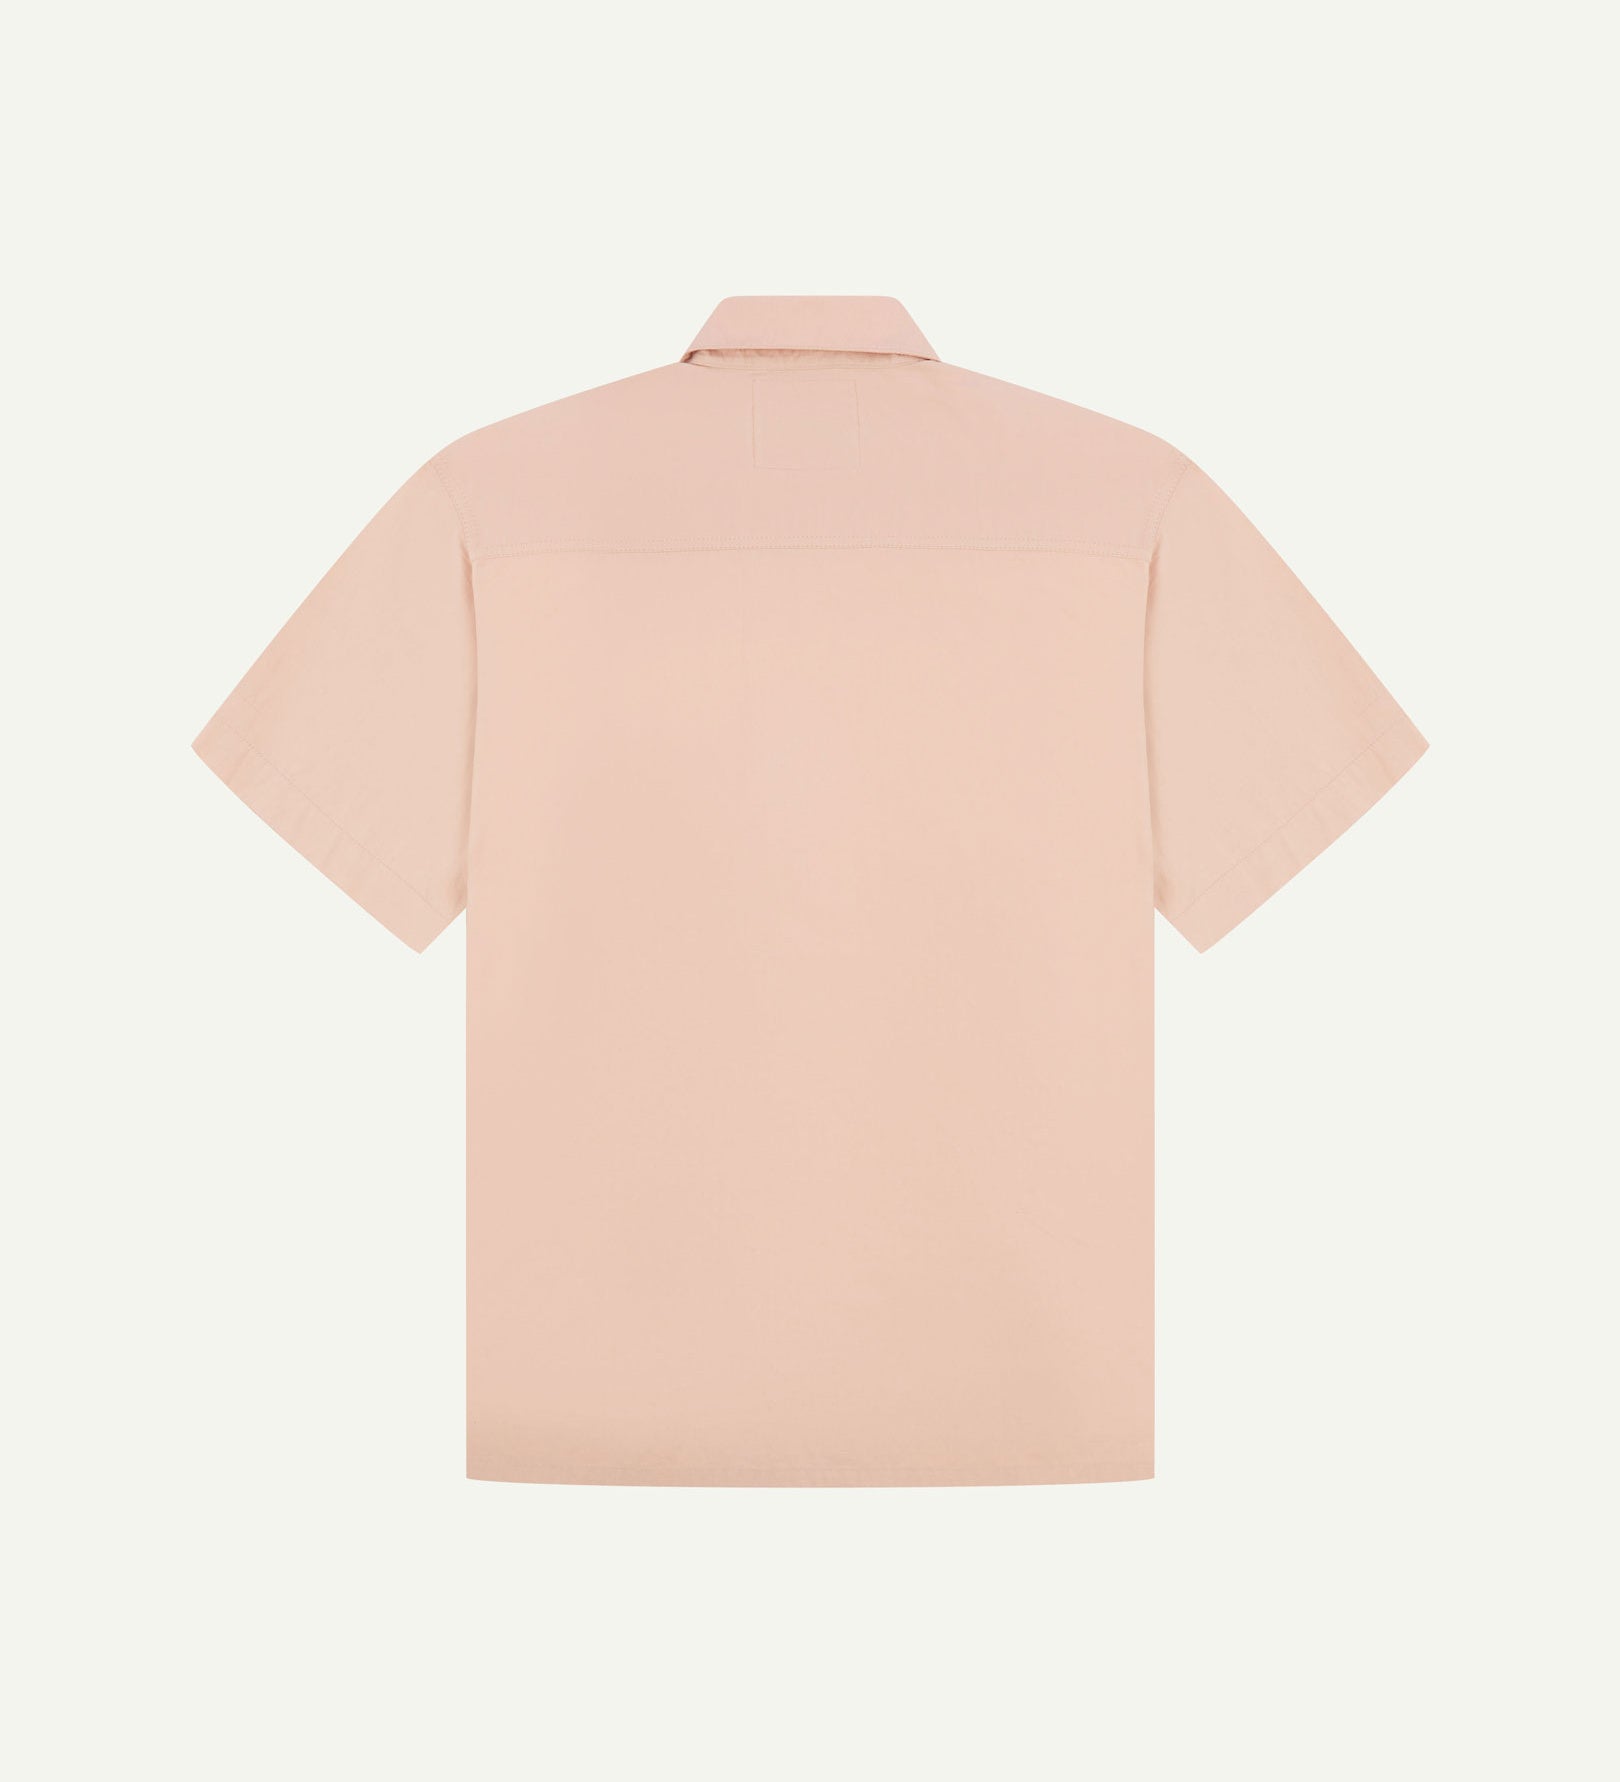 Reverse flat view of dusty pink lightweight short sleeve shirt from Uskees.